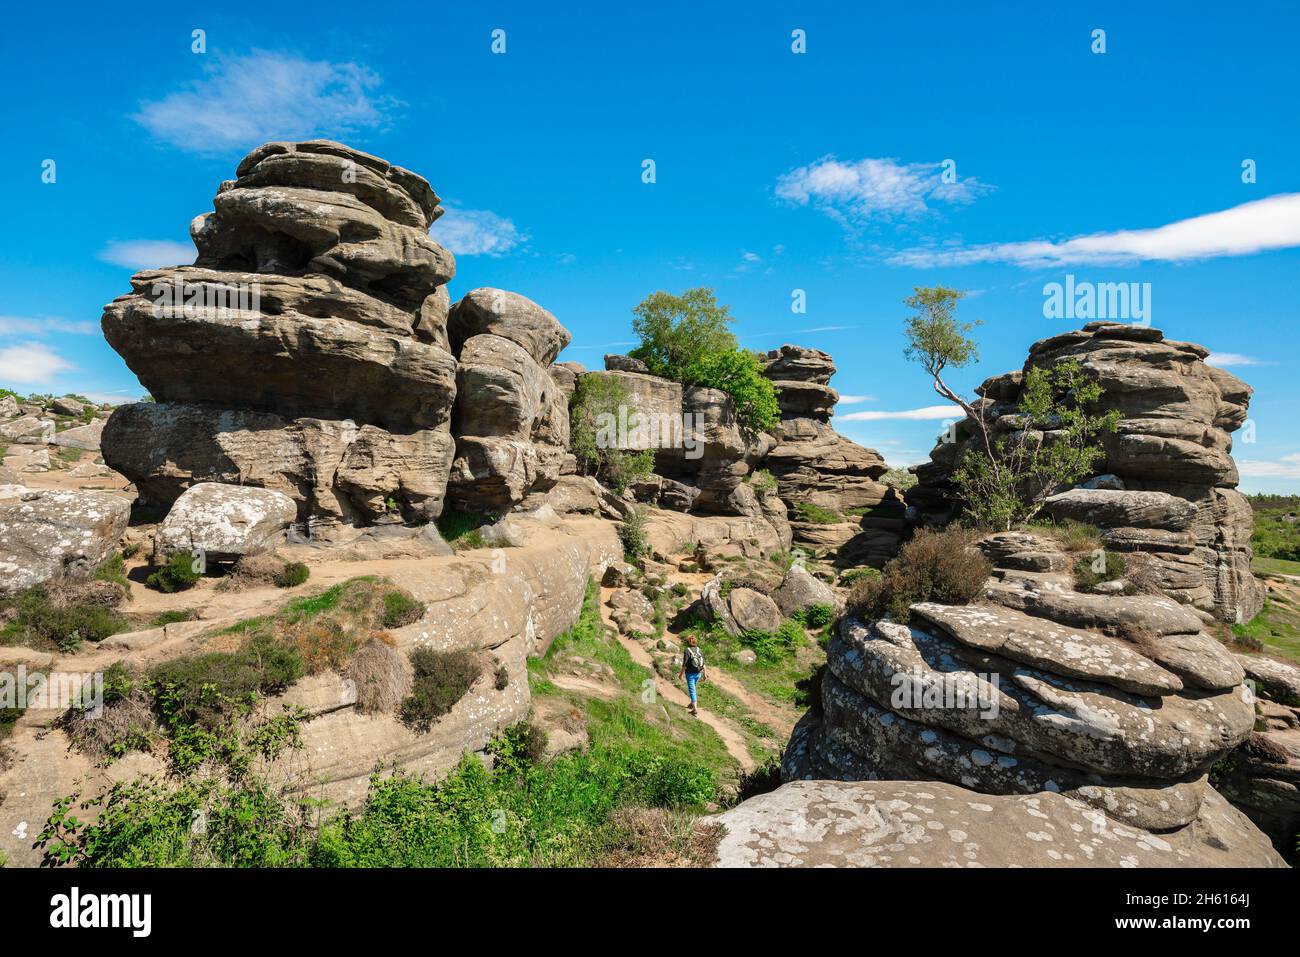 North Yorkshire, view in summer of a woman with a backpack exploring huge eroded rock formations at Brimham Rocks in Nidderdale, Yorkshire, England UK Stock Photo